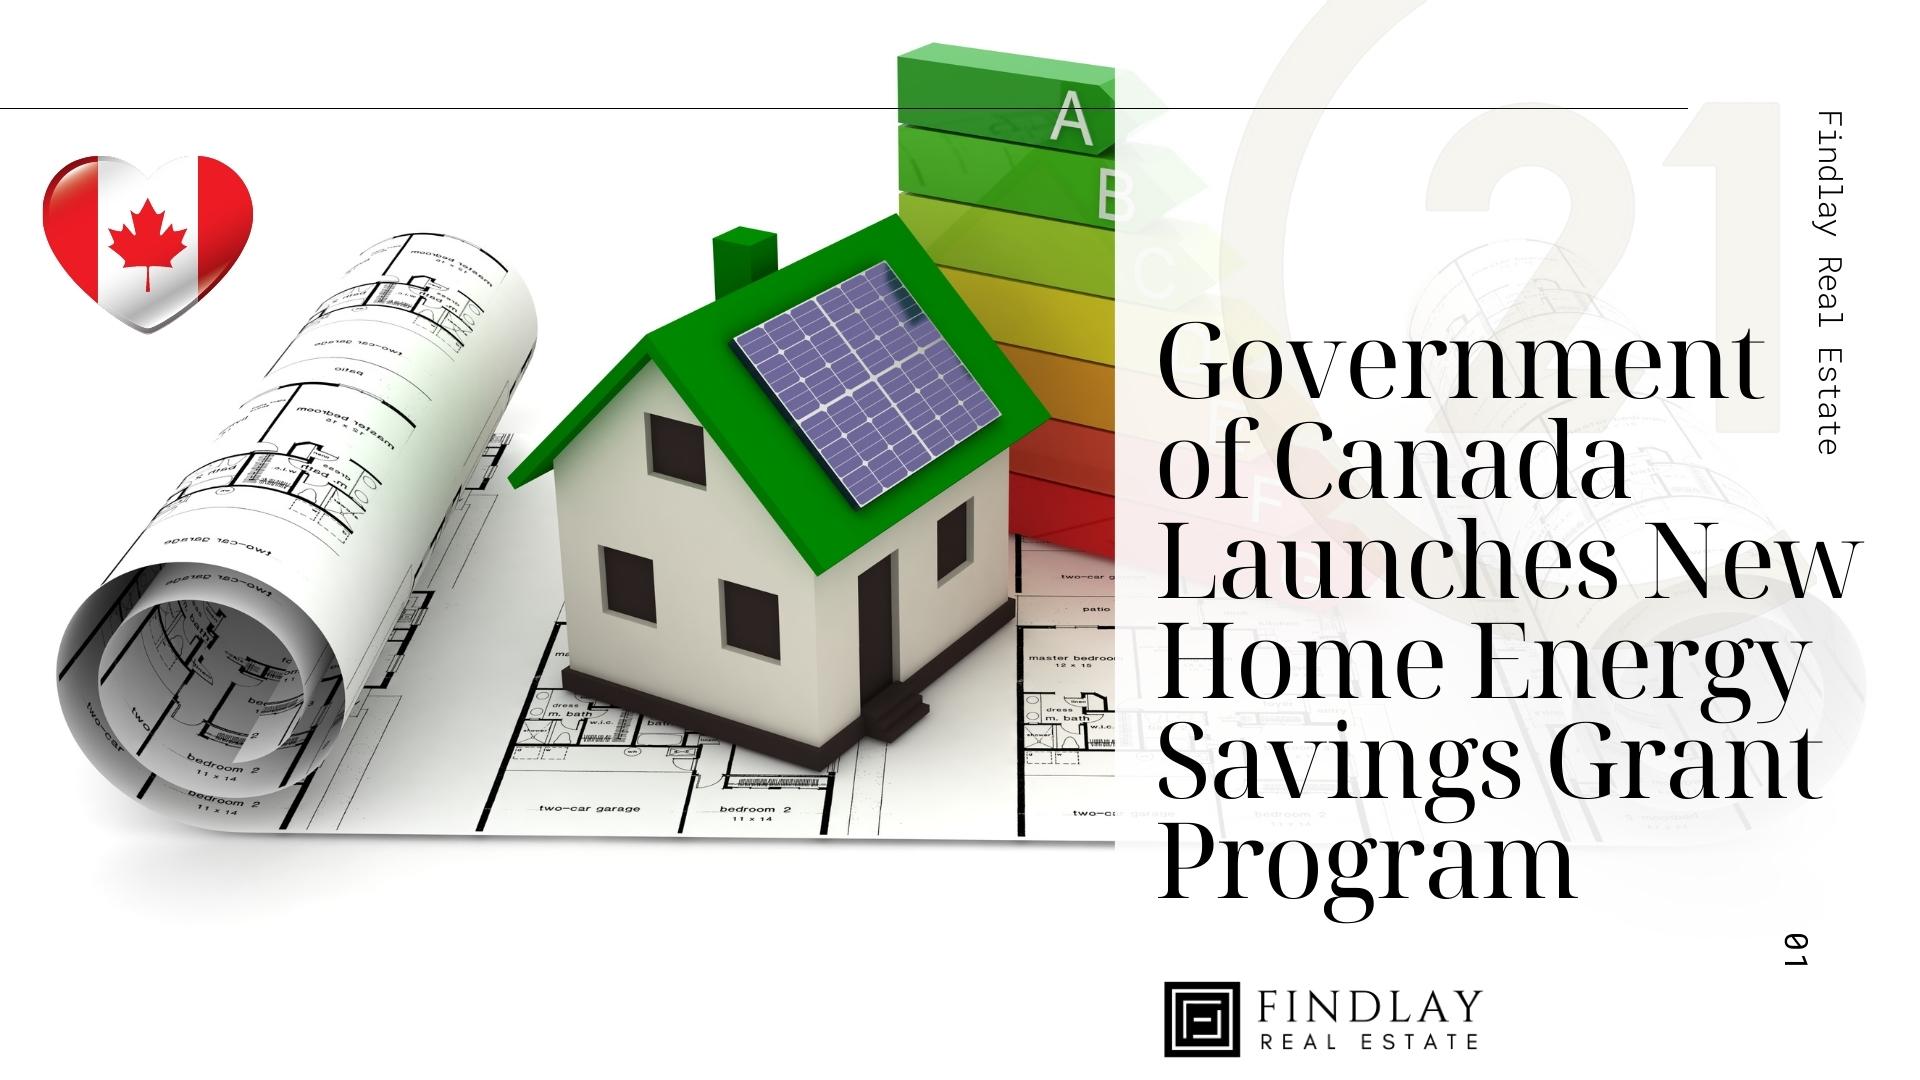 Government of Canada Launches New Home Energy Savings Grant Program